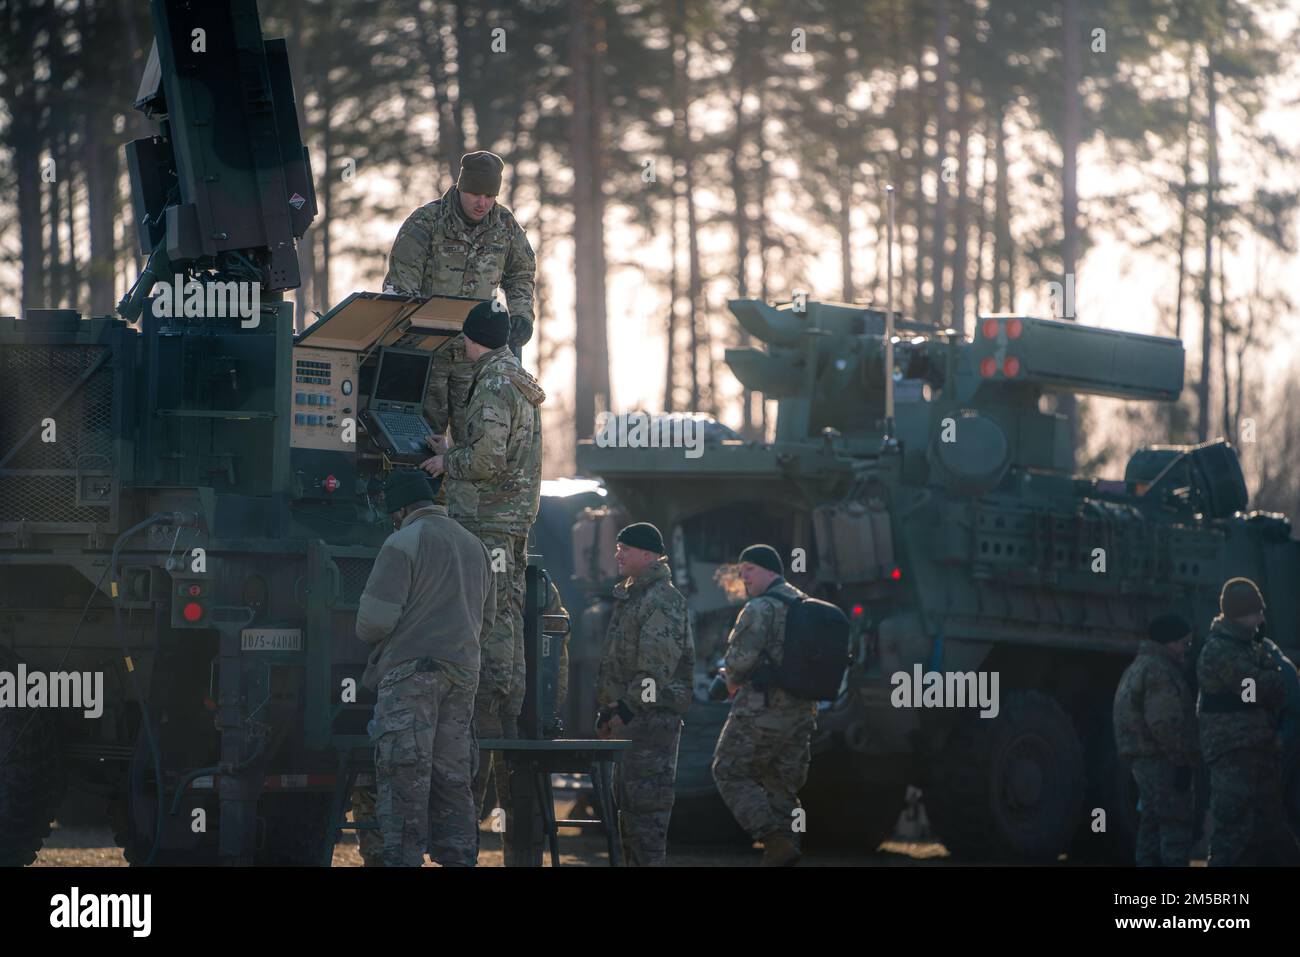 A U.S. Army Soldiers, assigned to 5th Battalion, 4th Air Defense Artillery Regiment, prepare a Sentinel radar for the day’s training during Exercise Saber Strike 22 at BPTA, Poland on February 24, 2022. During Saber Strike, 5-4 ADA Battalion is conducting a series of air & missile defense drills with NATO Allies Poland, Lithuana, Latvia, and Estonia. The exercise runs through March with approximately 13,000 participants from 13 countries. Saber Strike has been held every 2 years since 2010. U.S. Army photo by Maj. Robert Fellingham) Stock Photo